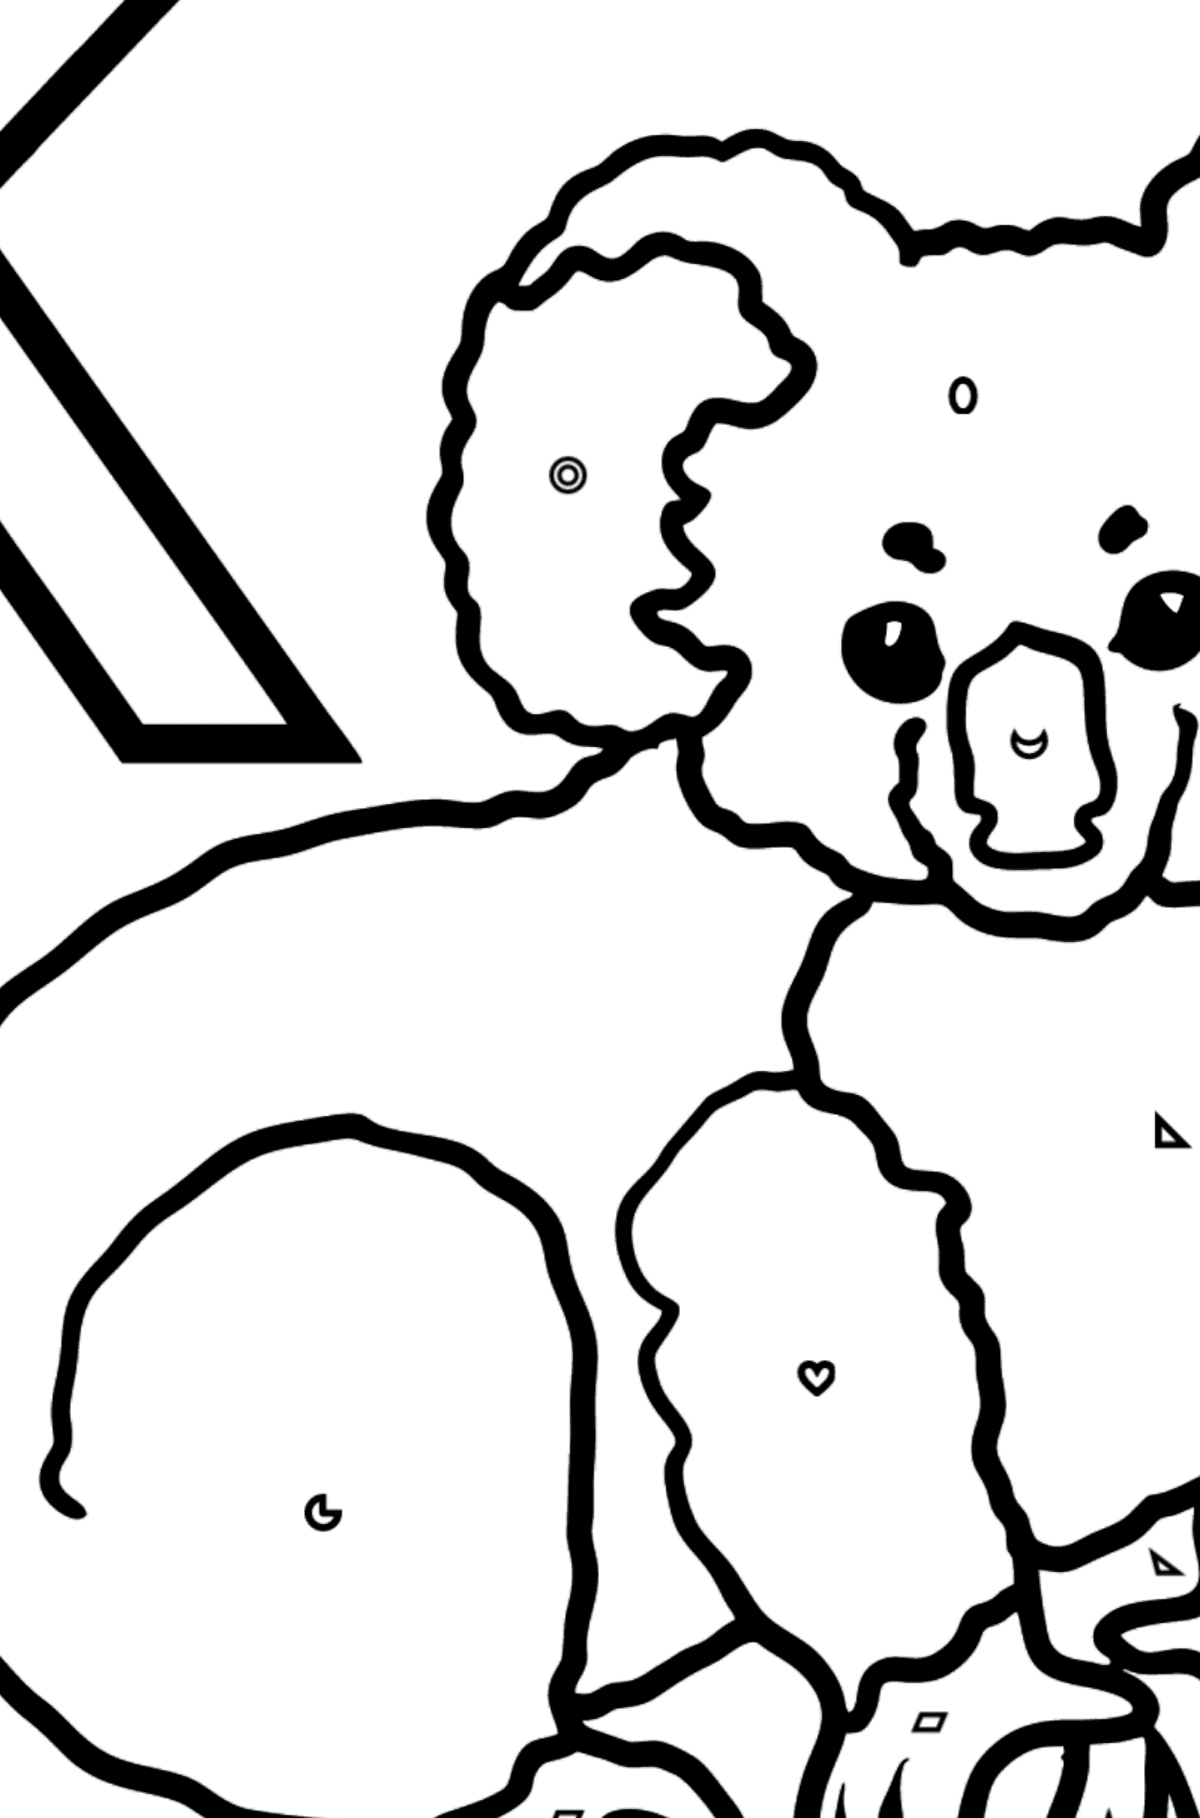 Spanish Letter K coloring pages - KOALA - Coloring by Geometric Shapes for Kids